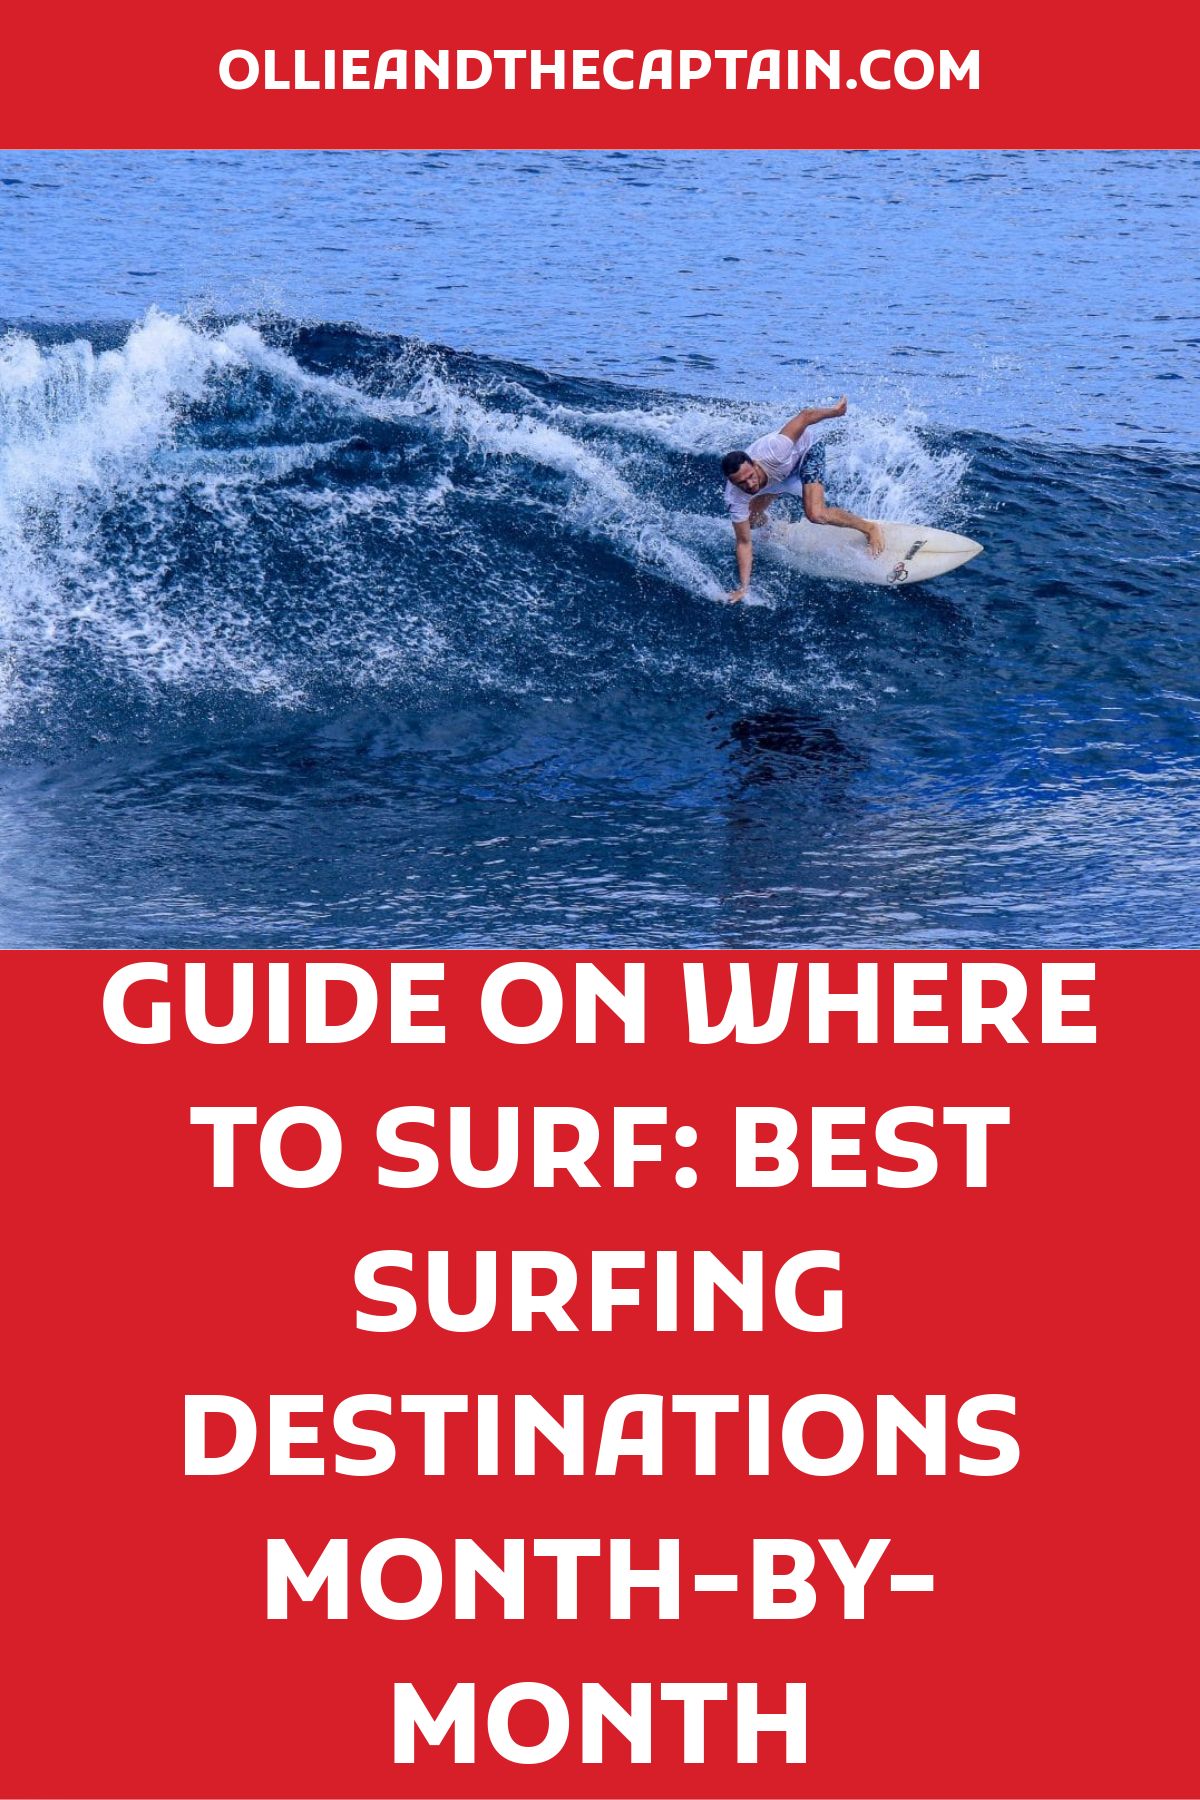 Surf's Up: The Central Coast Surf Spots to Add to Your Itinerary